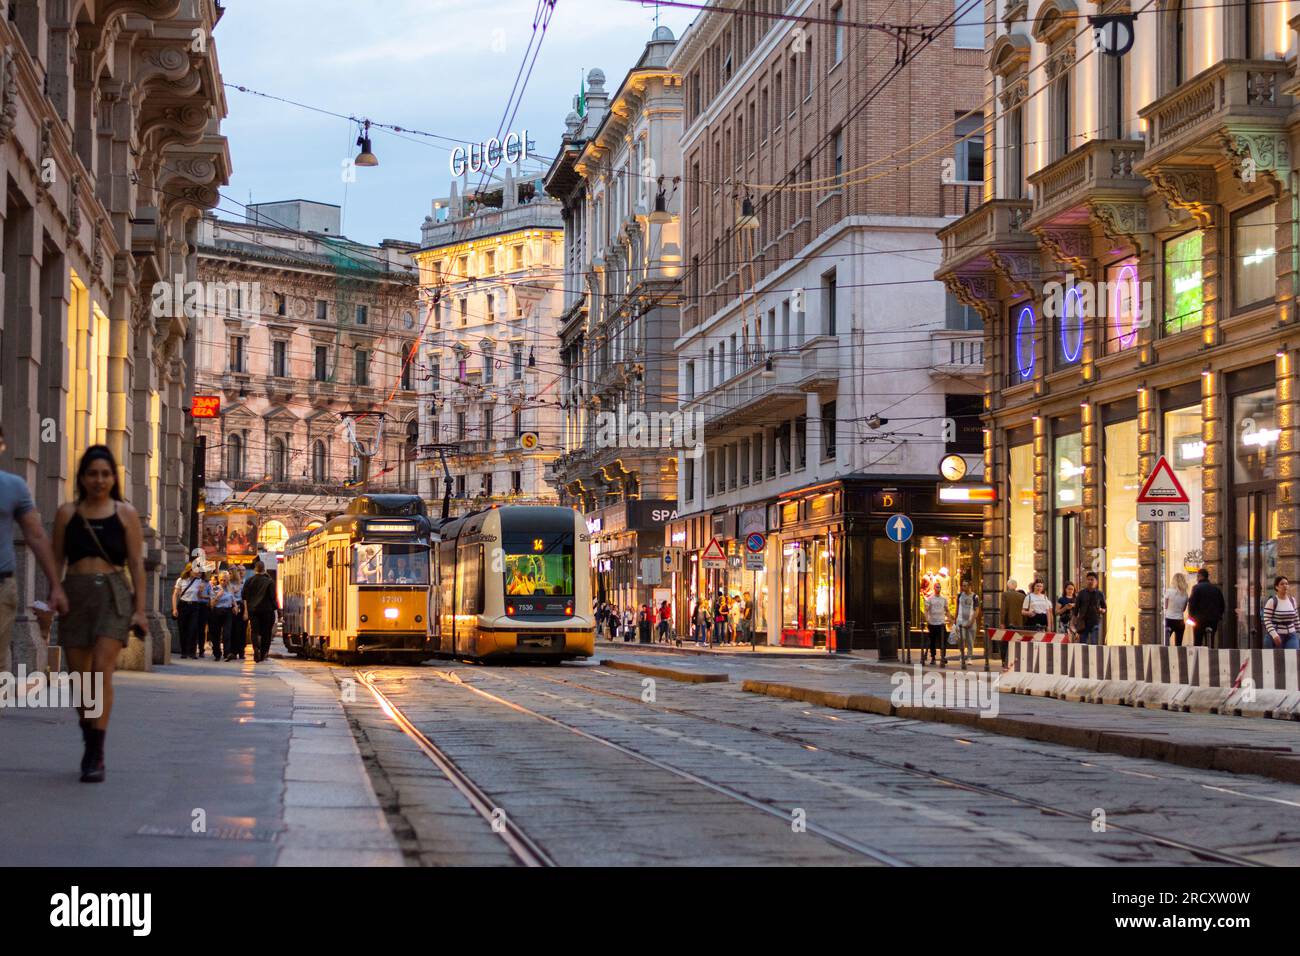 A vintage tram and a newer model cross paths - Milan, Italy Stock Photo